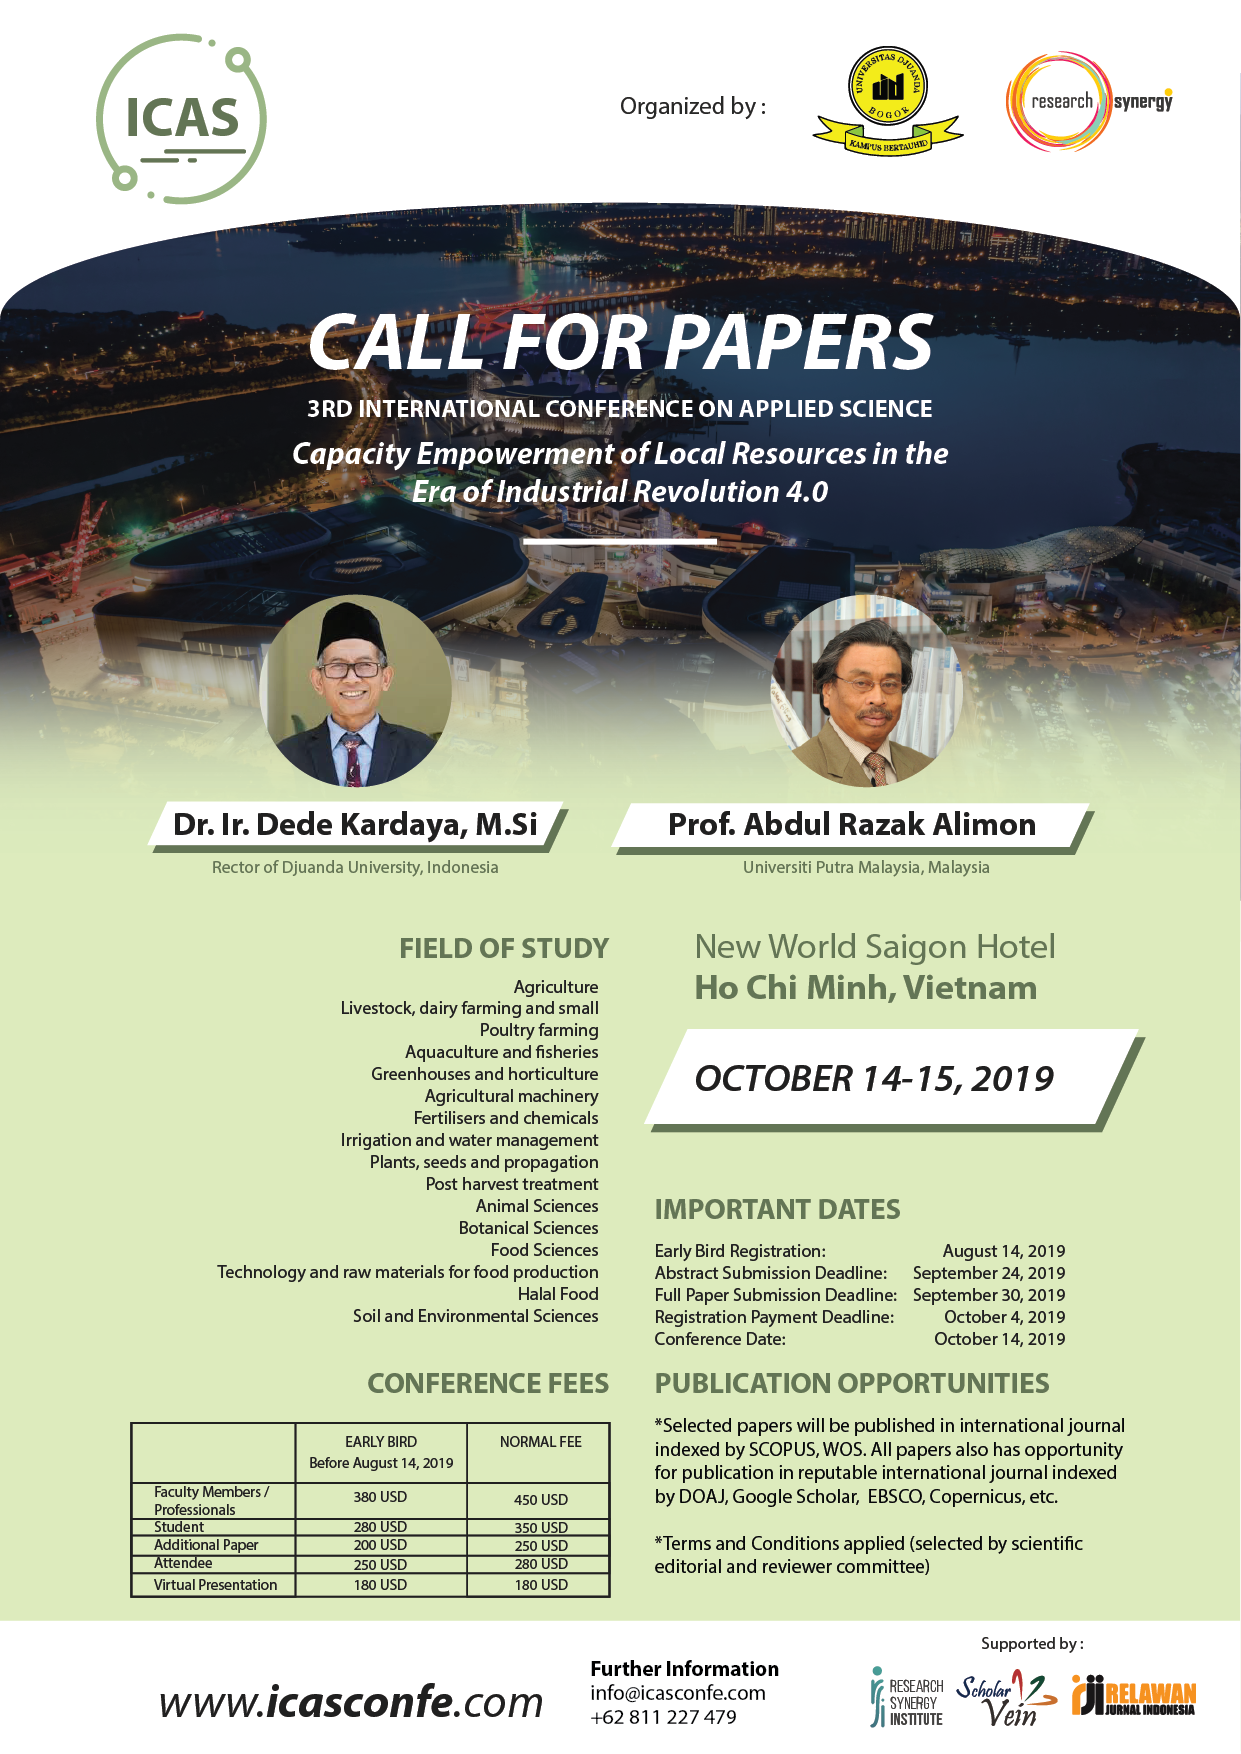 3rd International Conference for Applied Science (ICAS)